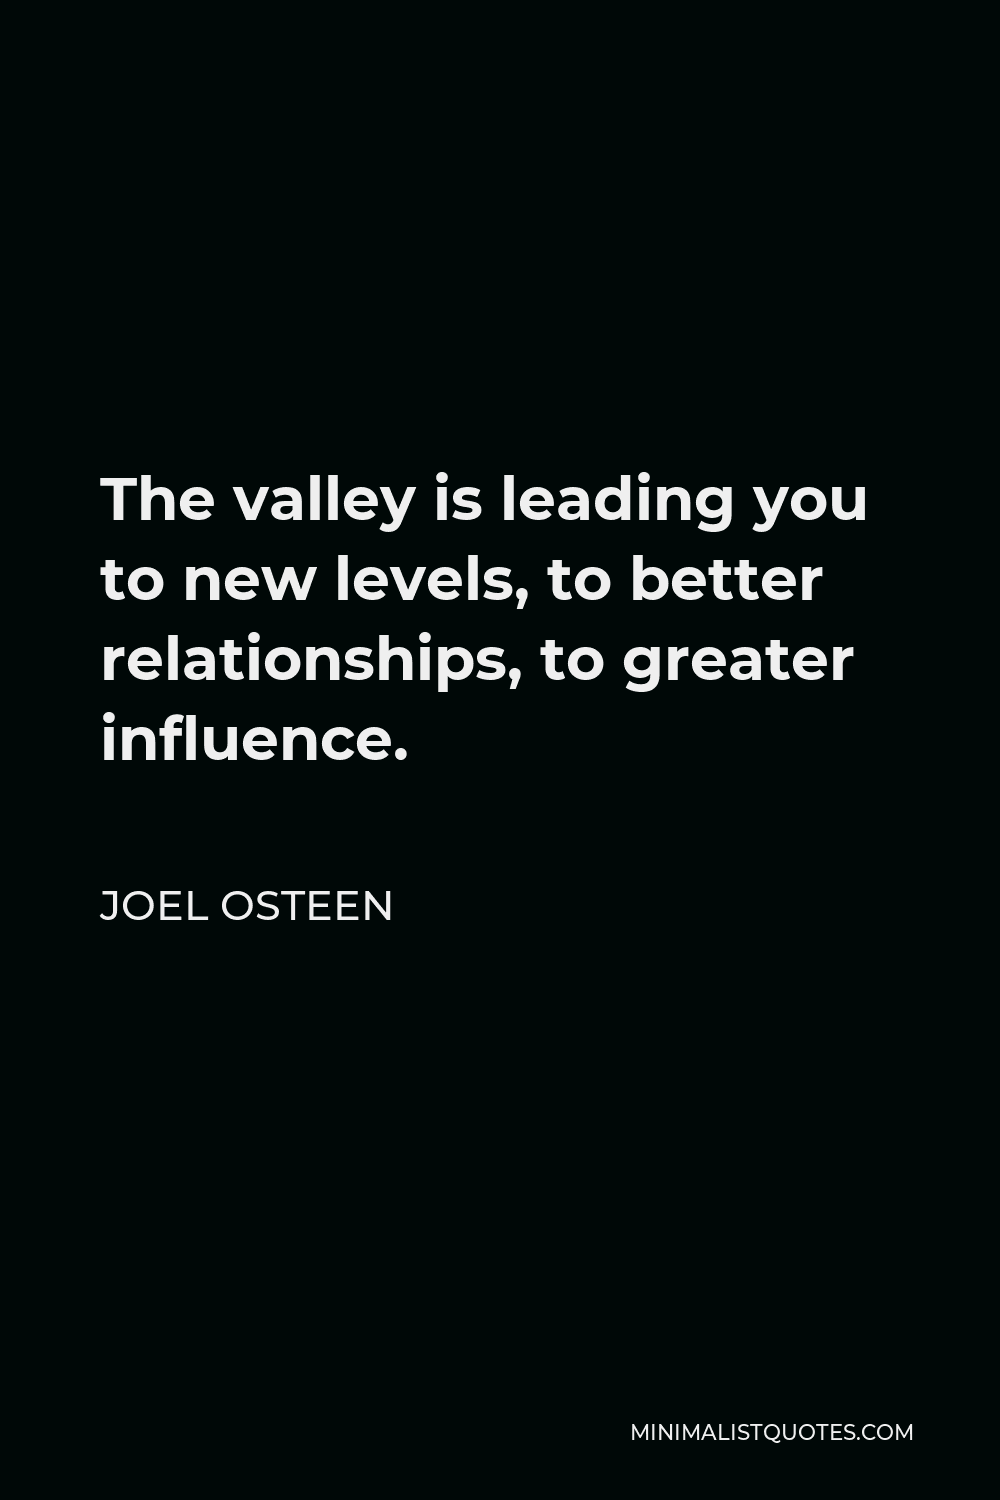 Joel Osteen Quote - The valley is leading you to new levels, to better relationships, to greater influence.